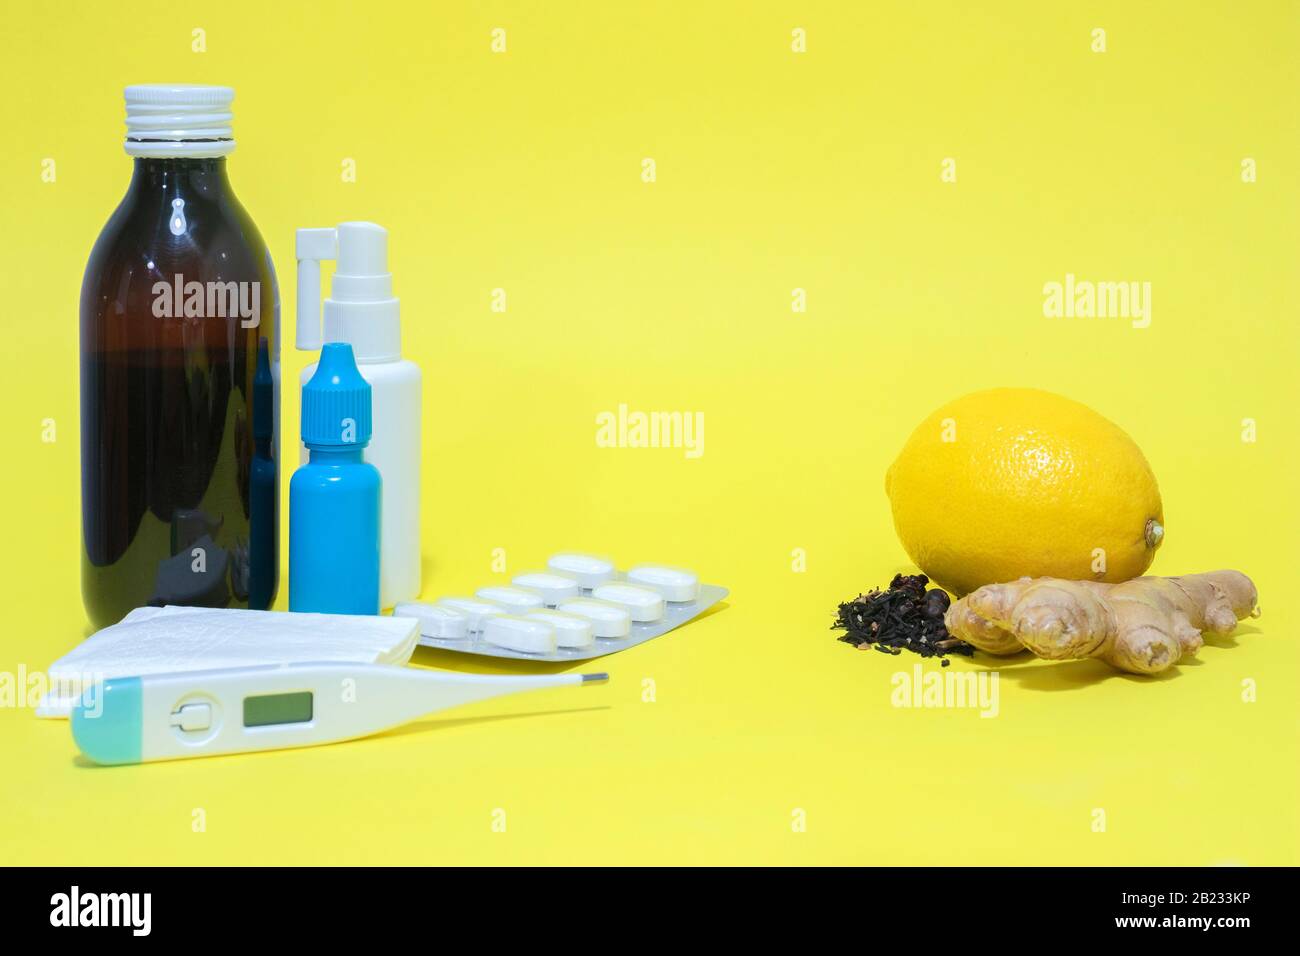 Natual remedies versus drugs and pills for curing flu and cold on yellow background Stock Photo